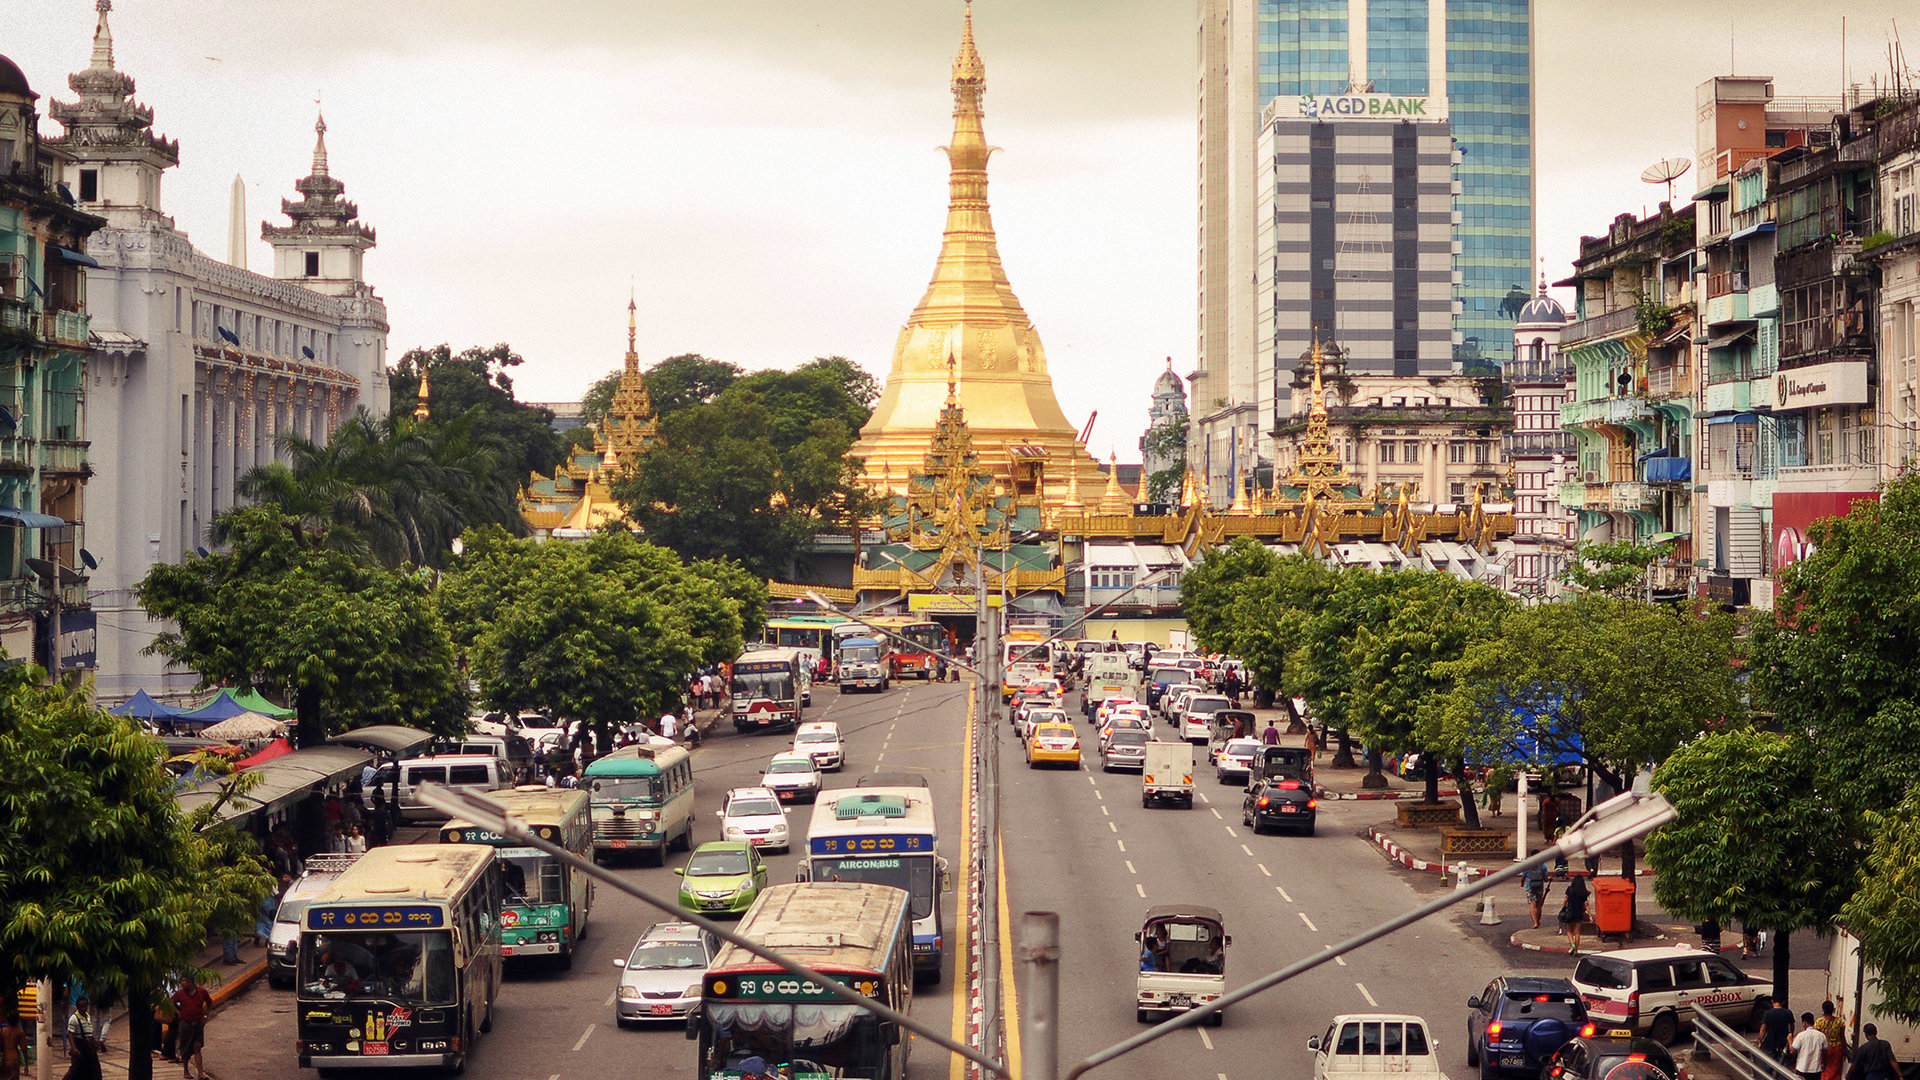 Norton Rose Fulbright advises Myanmar on new insolvency law